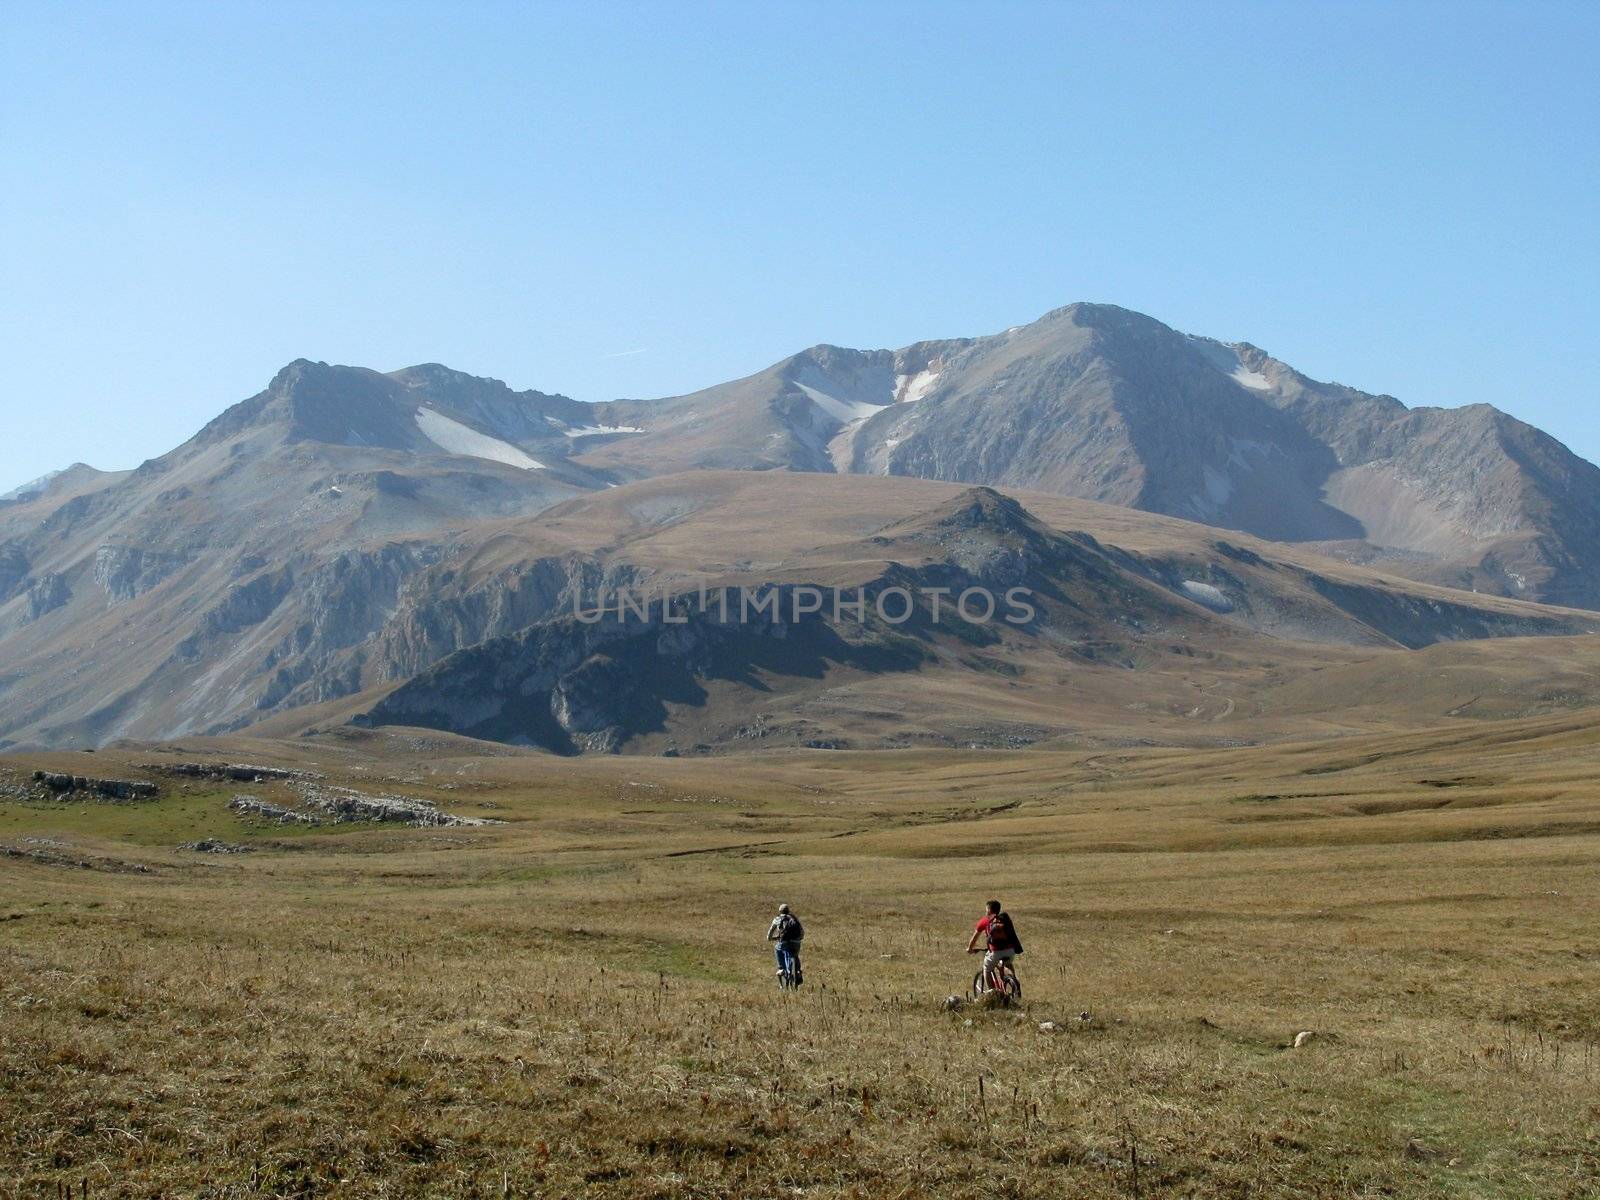 Mountains, caucasus, rocks, a relief, a landscape, the nature, a panorama, a landscape, a ridge, top, breed, the sky, reserve, a background, a kind, bicyclists, a slope, peak, beauty, bright, a file, a glacier, sports, tourists, a grass, the Alpine meadows, tourism, travel, productive leisure, autumnt